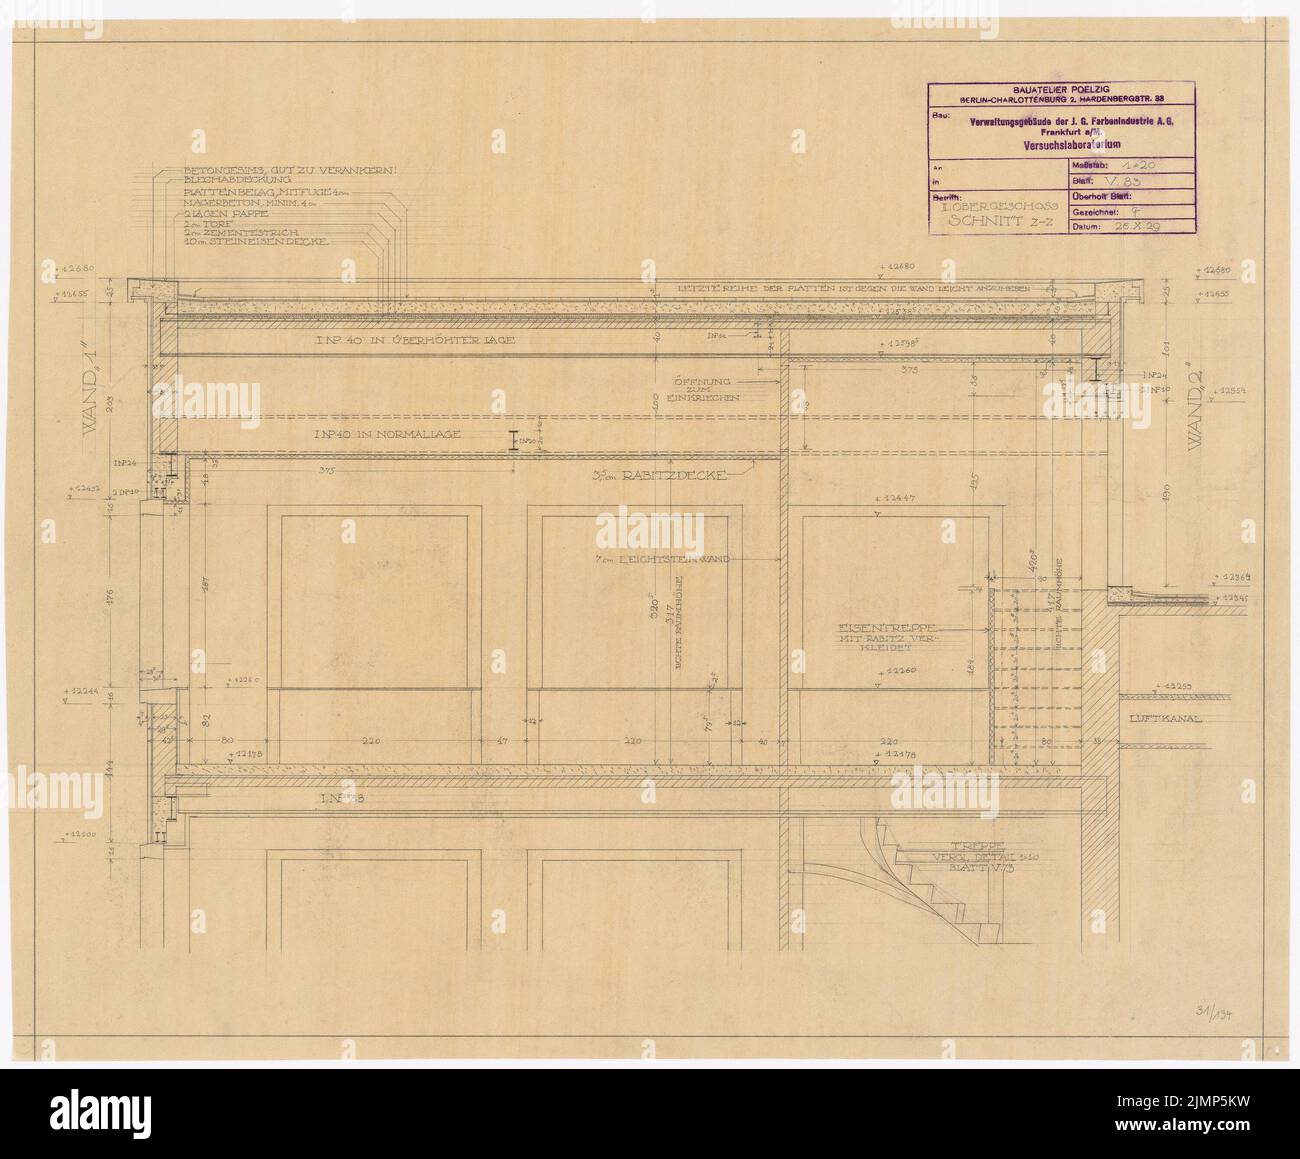 Poelzig Hans (1869-1936), I.G.-colors in Frankfurt/Main. Experimental laboratory (October 26, 1929): Cuts Z-Z and U-U in the 2nd of 1:20. Pencil on transparent, 54.5 x 66.3 cm (including scan edges) Poelzig Hans  (1869-1936): I.G.-Farben, Frankfurt/Main. Versuchslaboratorium Stock Photo